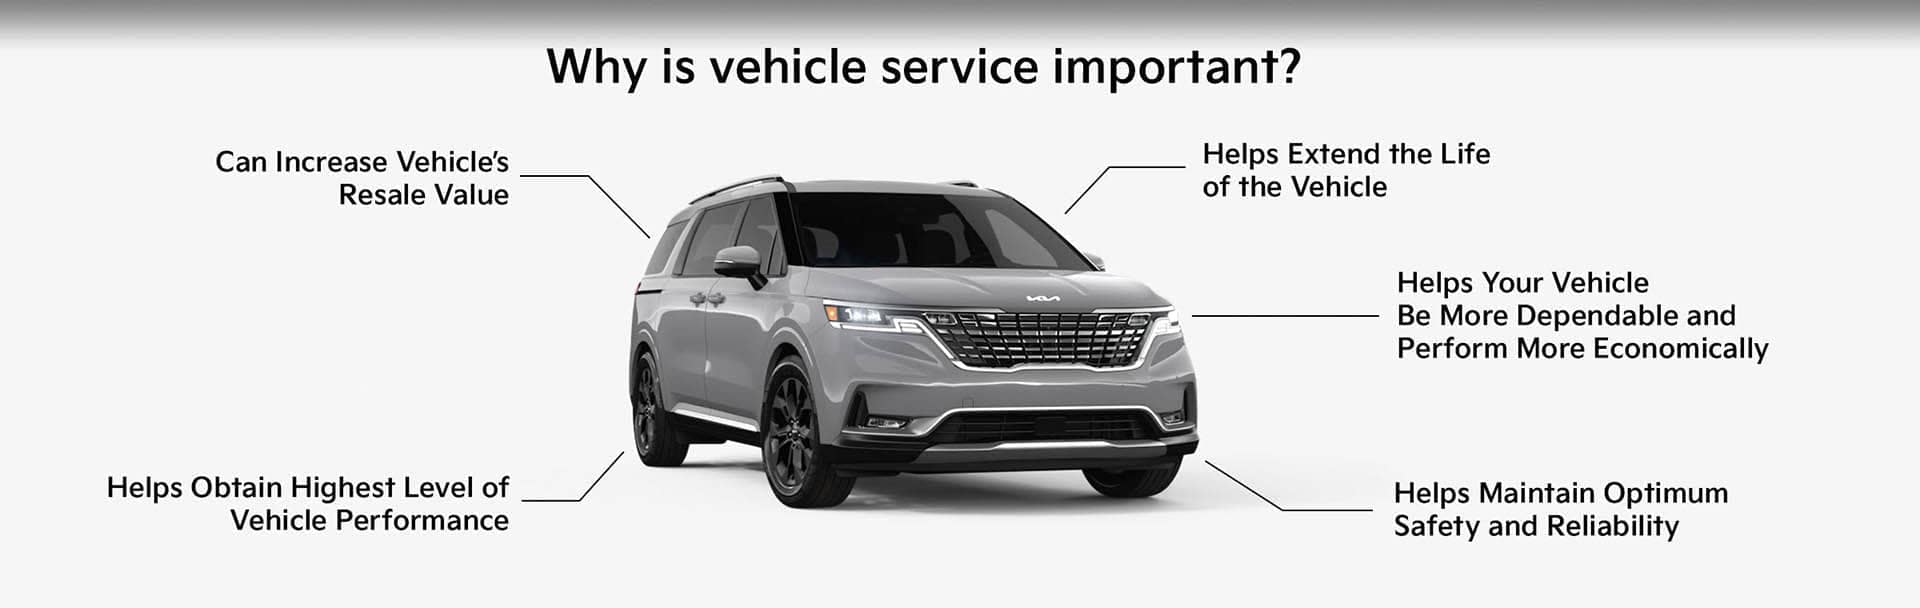 Why vehicle service is important